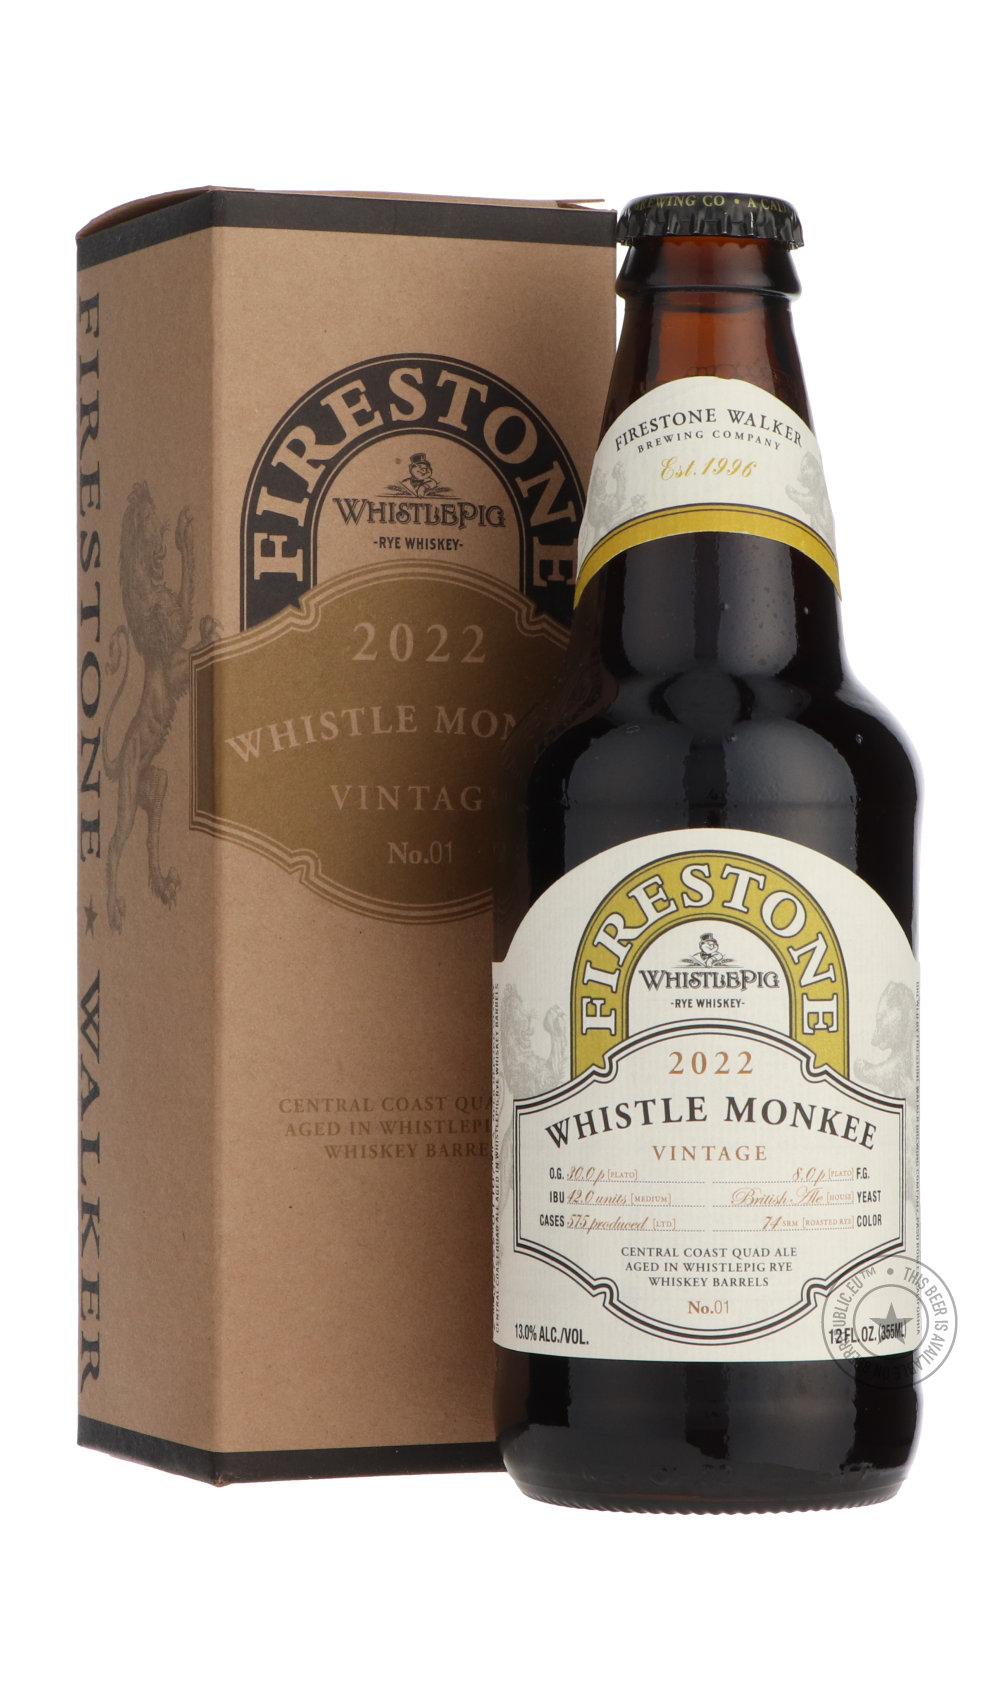 -Firestone Walker- Whistle Monkee-Brown & Dark- Only @ Beer Republic - The best online beer store for American & Canadian craft beer - Buy beer online from the USA and Canada - Bier online kopen - Amerikaans bier kopen - Craft beer store - Craft beer kopen - Amerikanisch bier kaufen - Bier online kaufen - Acheter biere online - IPA - Stout - Porter - New England IPA - Hazy IPA - Imperial Stout - Barrel Aged - Barrel Aged Imperial Stout - Brown - Dark beer - Blond - Blonde - Pilsner - Lager - Wheat - Weizen 